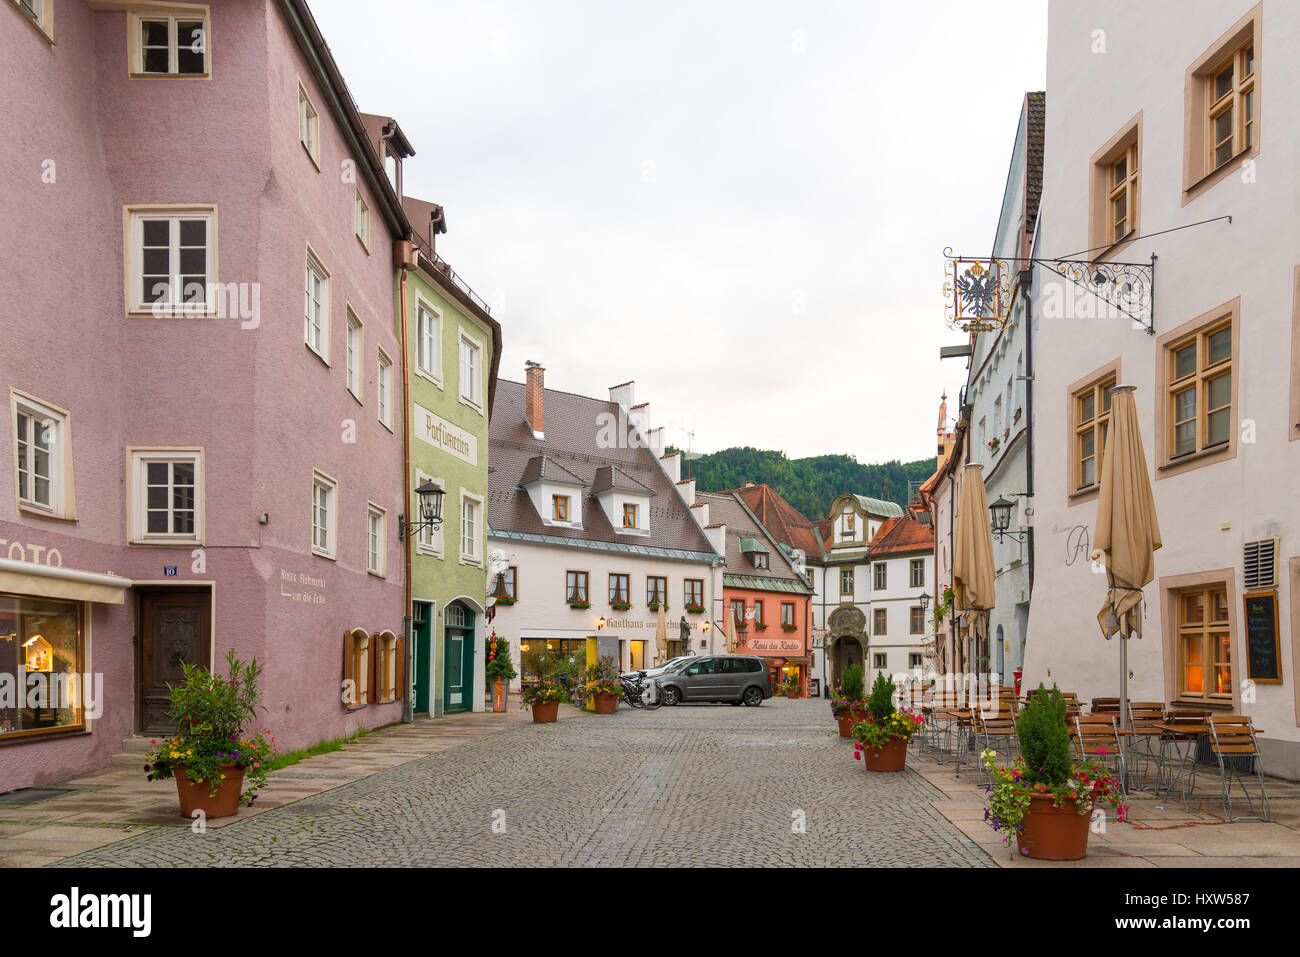 Fussen, Germany - June 4, 2016: View of pedestrian historical street in Fussen with typical bavarian architecture buildings. Stock Photo